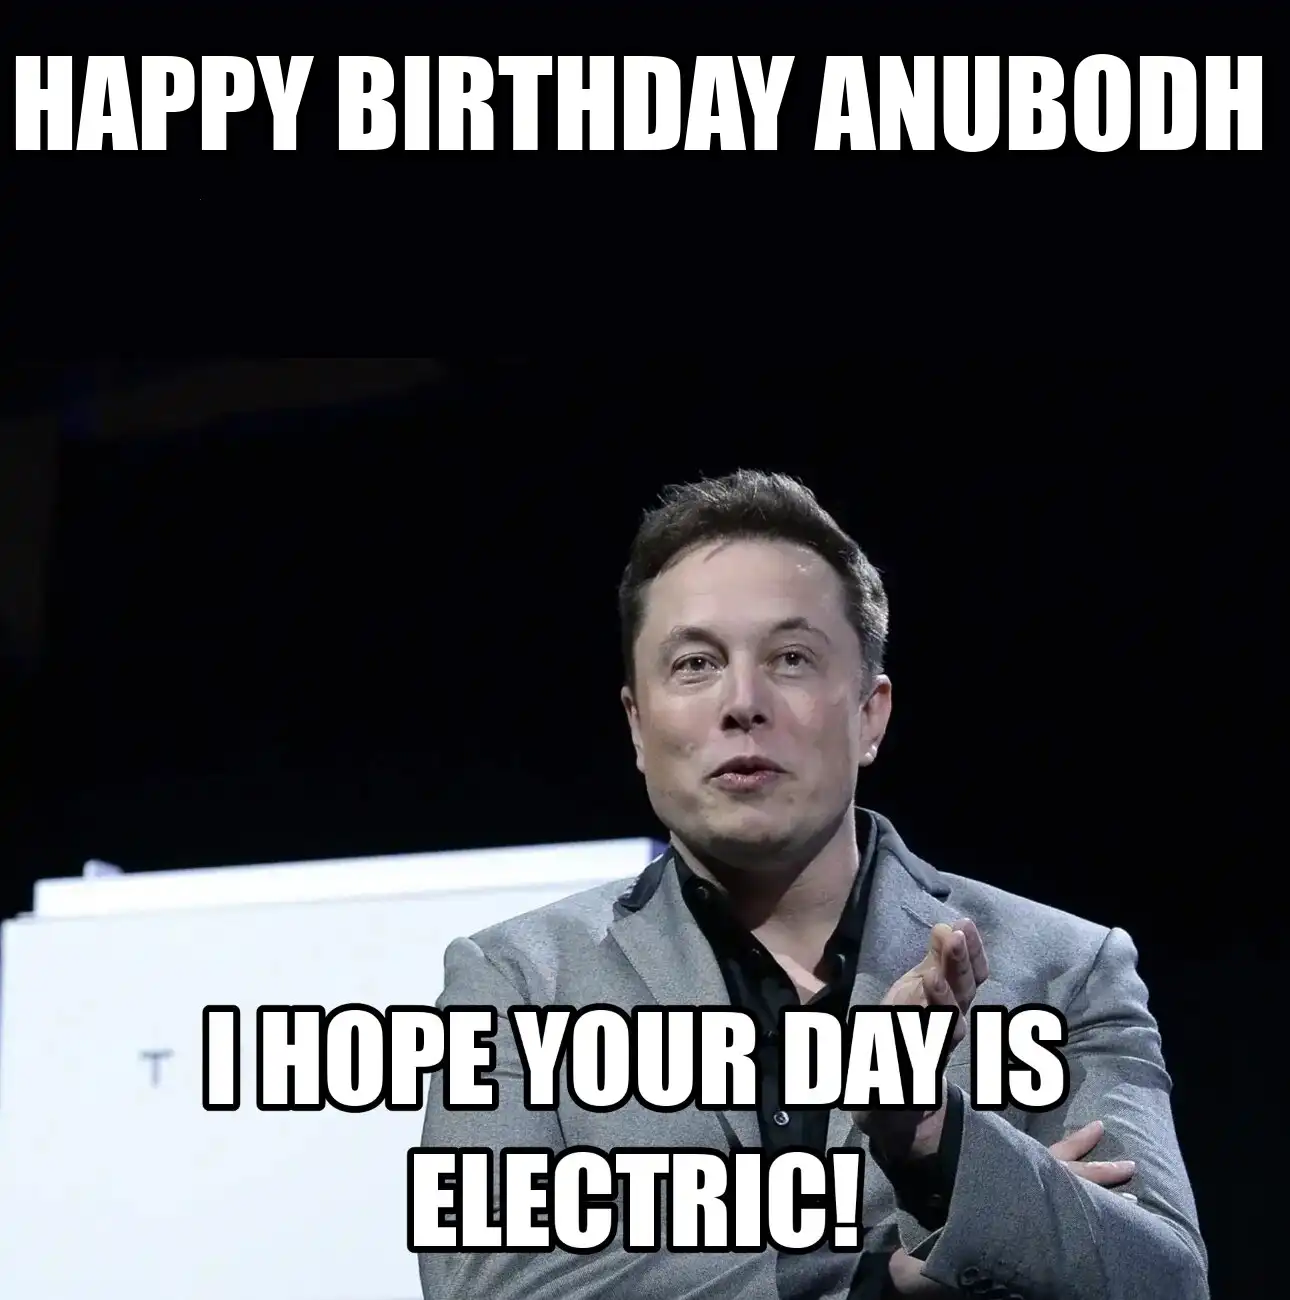 Happy Birthday Anubodh I Hope Your Day Is Electric Meme